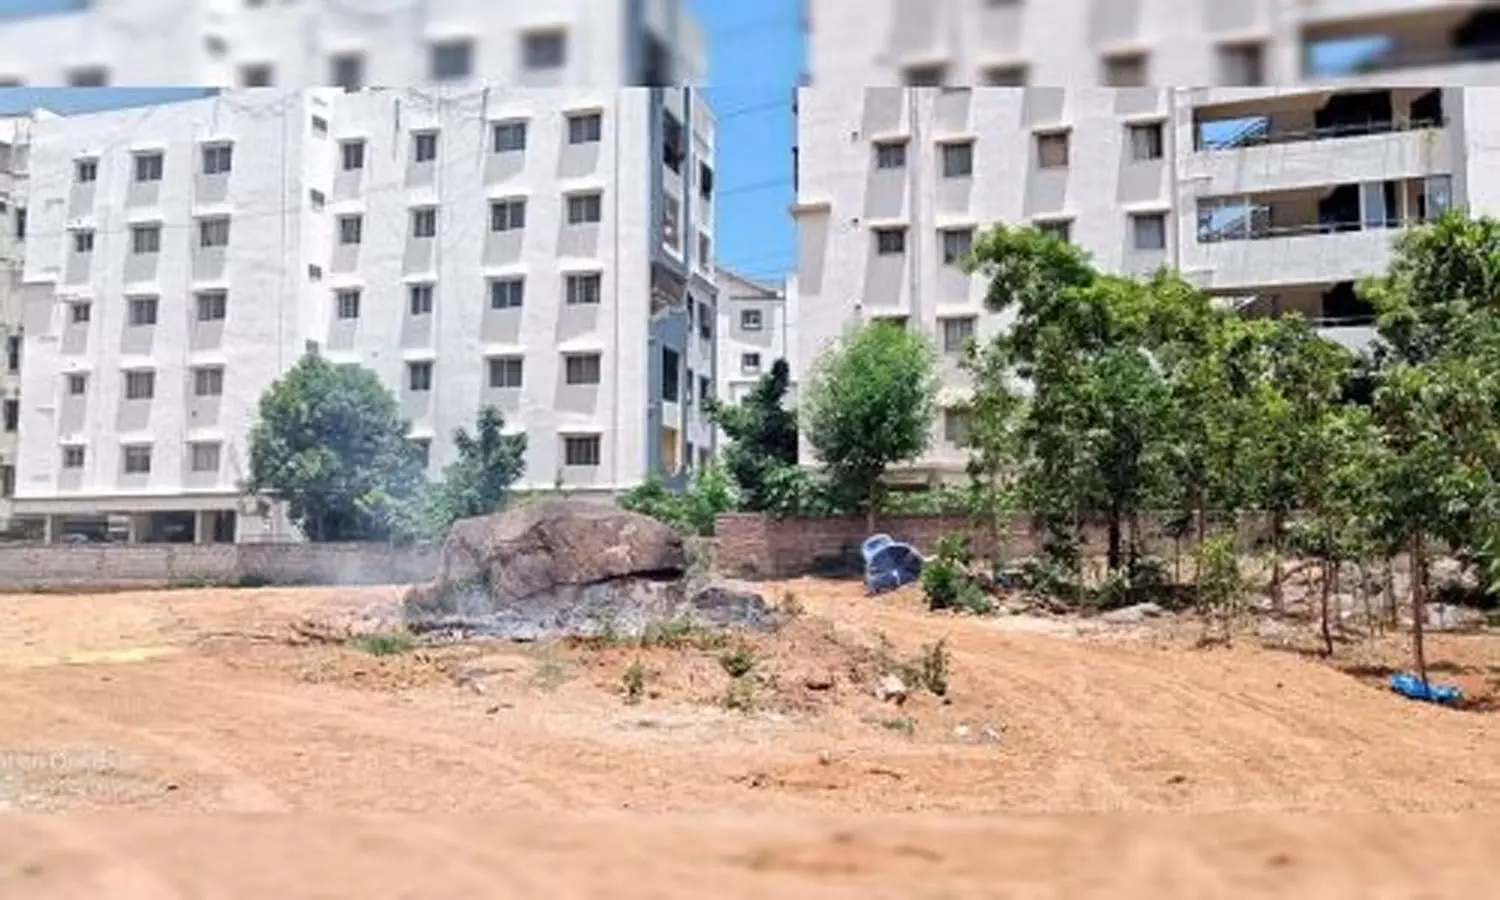 GHMC levies Rs 25,000 penalty for burning waste in open in Moosapet